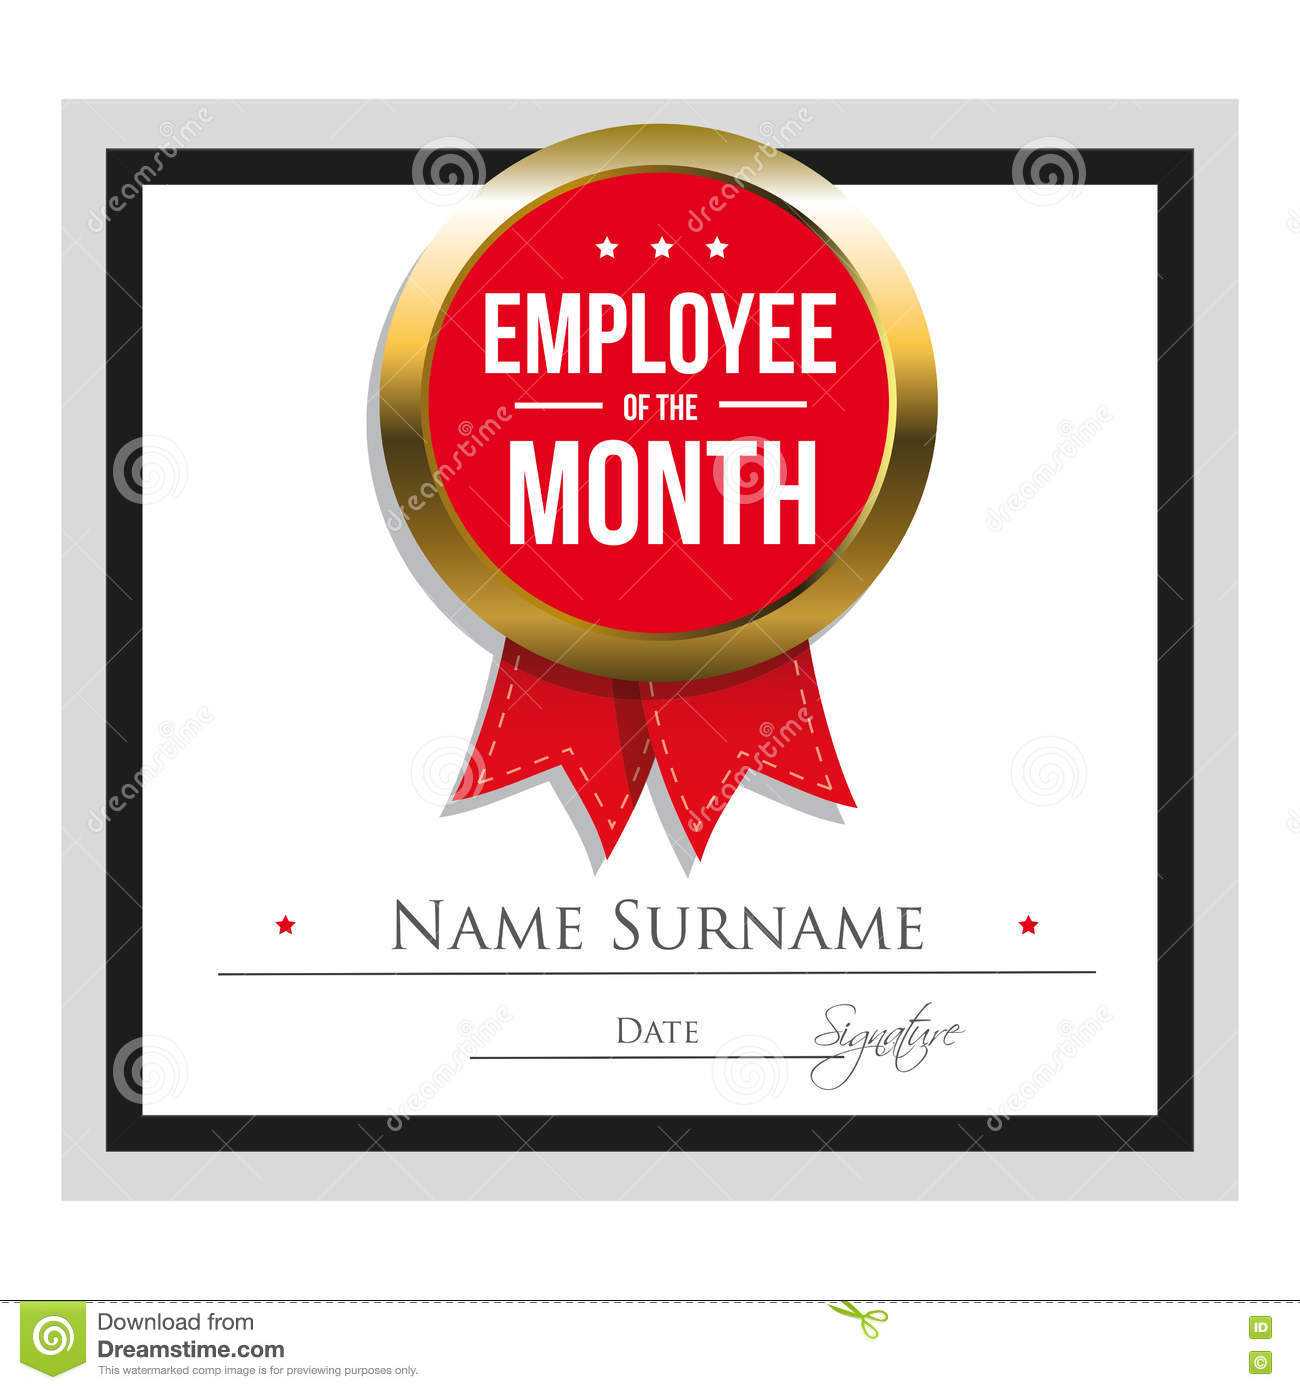 Employee Of The Month Certificate Template Stock Vector Regarding Employee Of The Month Certificate Templates